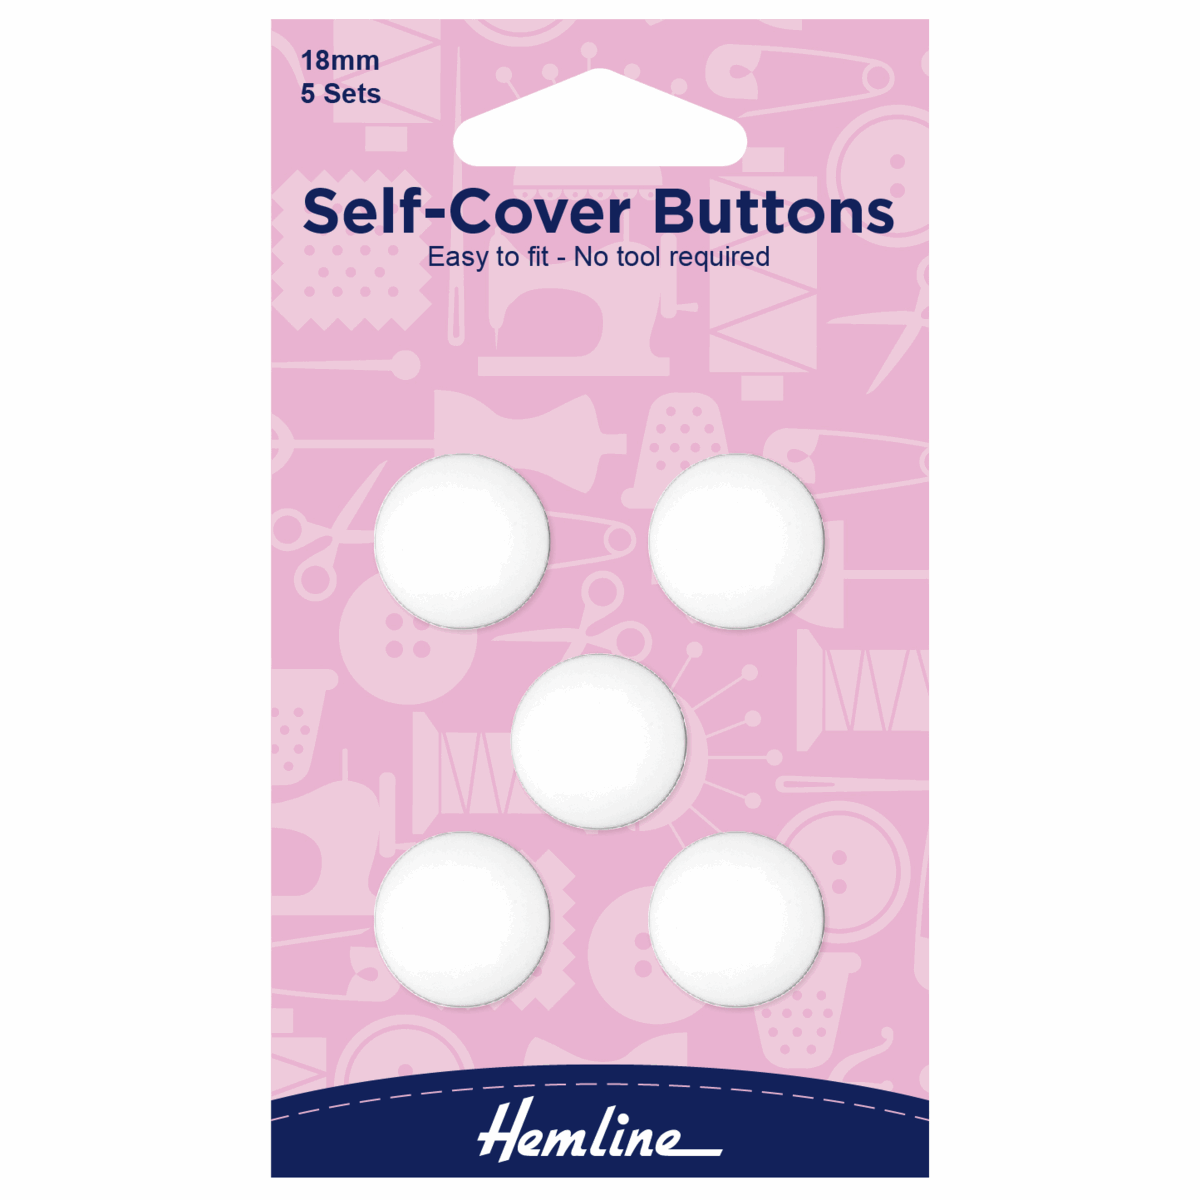 Self-Cover Buttons: Nylon: 19mm